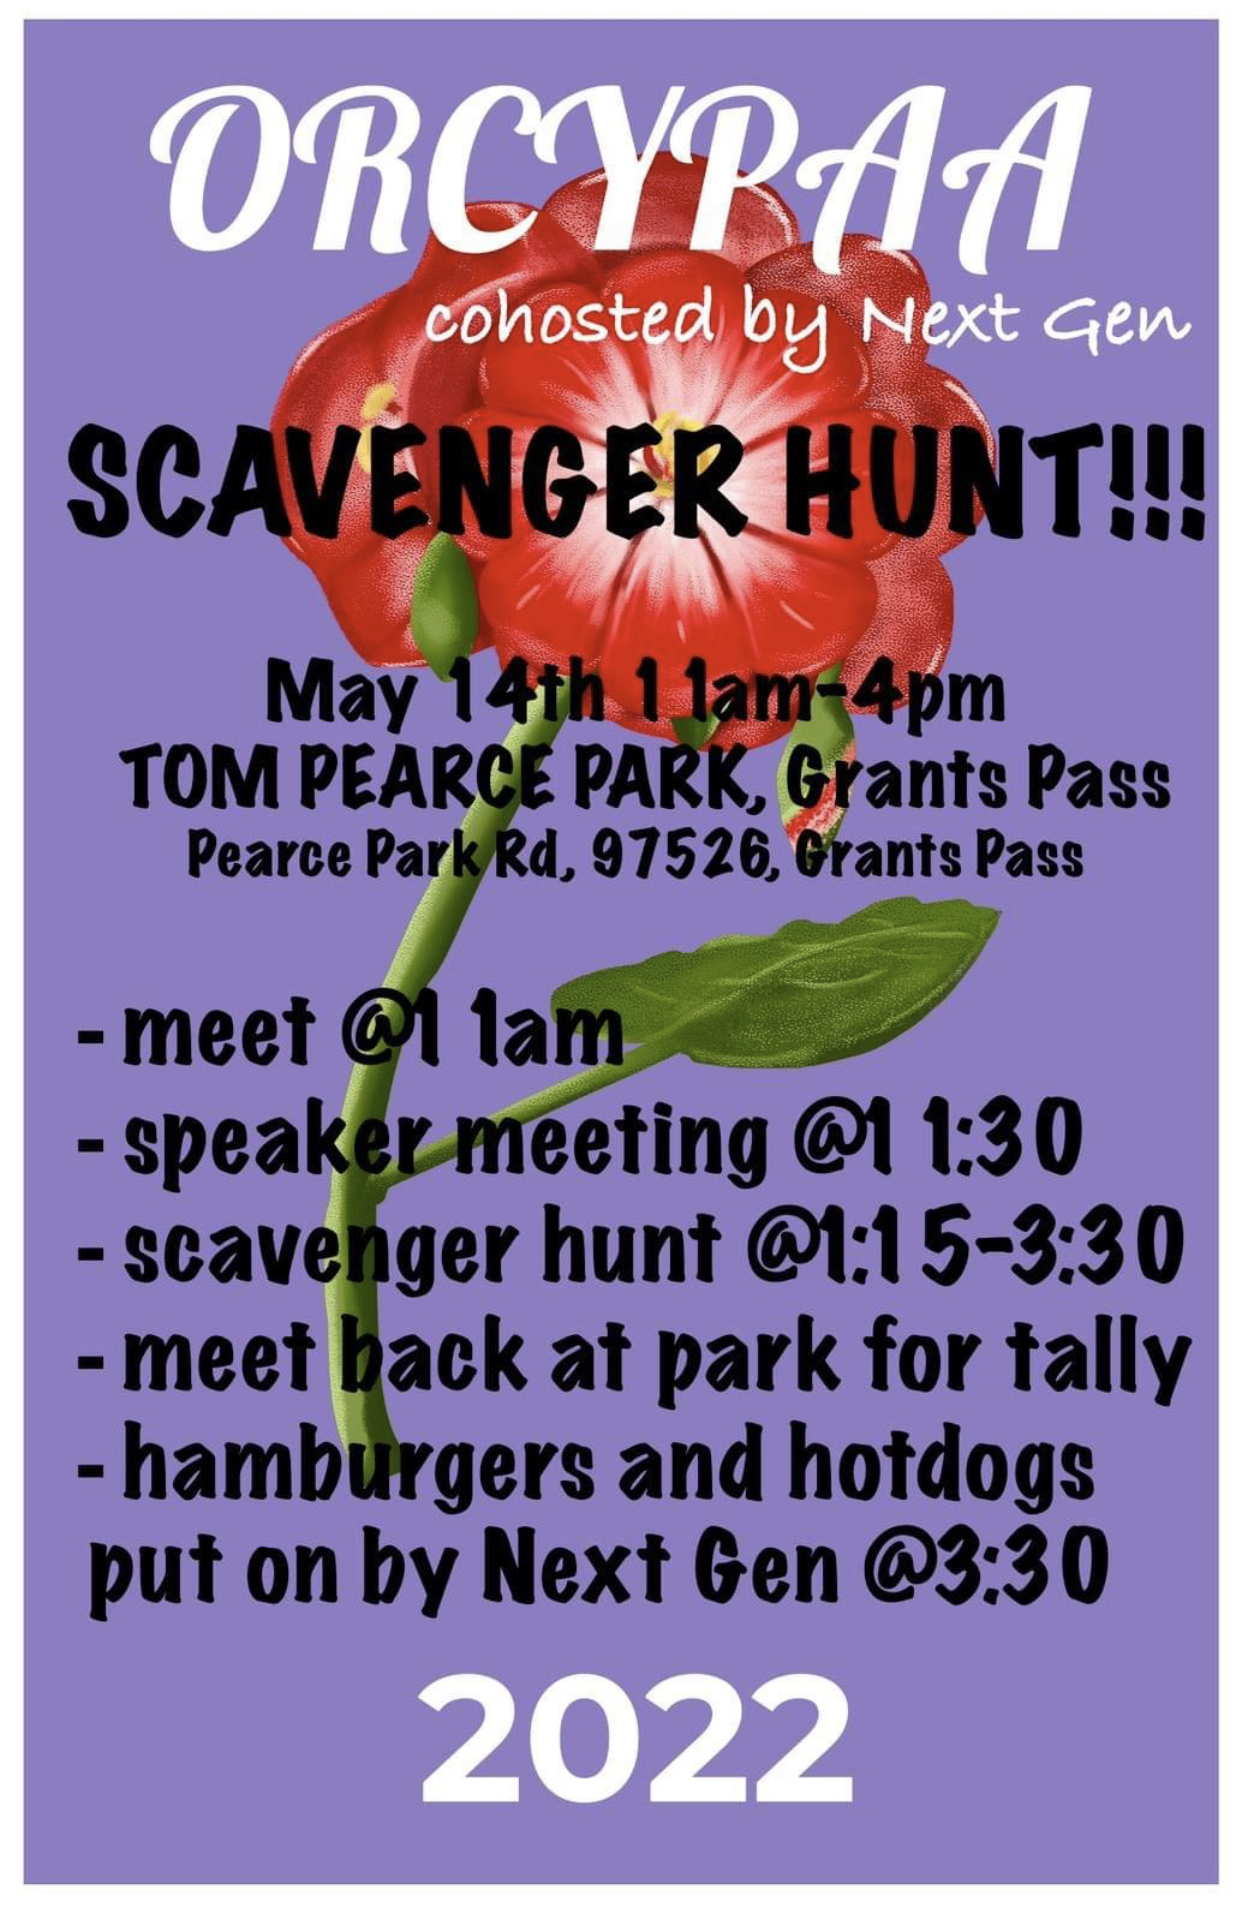 {A.A. EVENT}  -Scavenger Hunt hosted by ORCYPAA & Next Gen